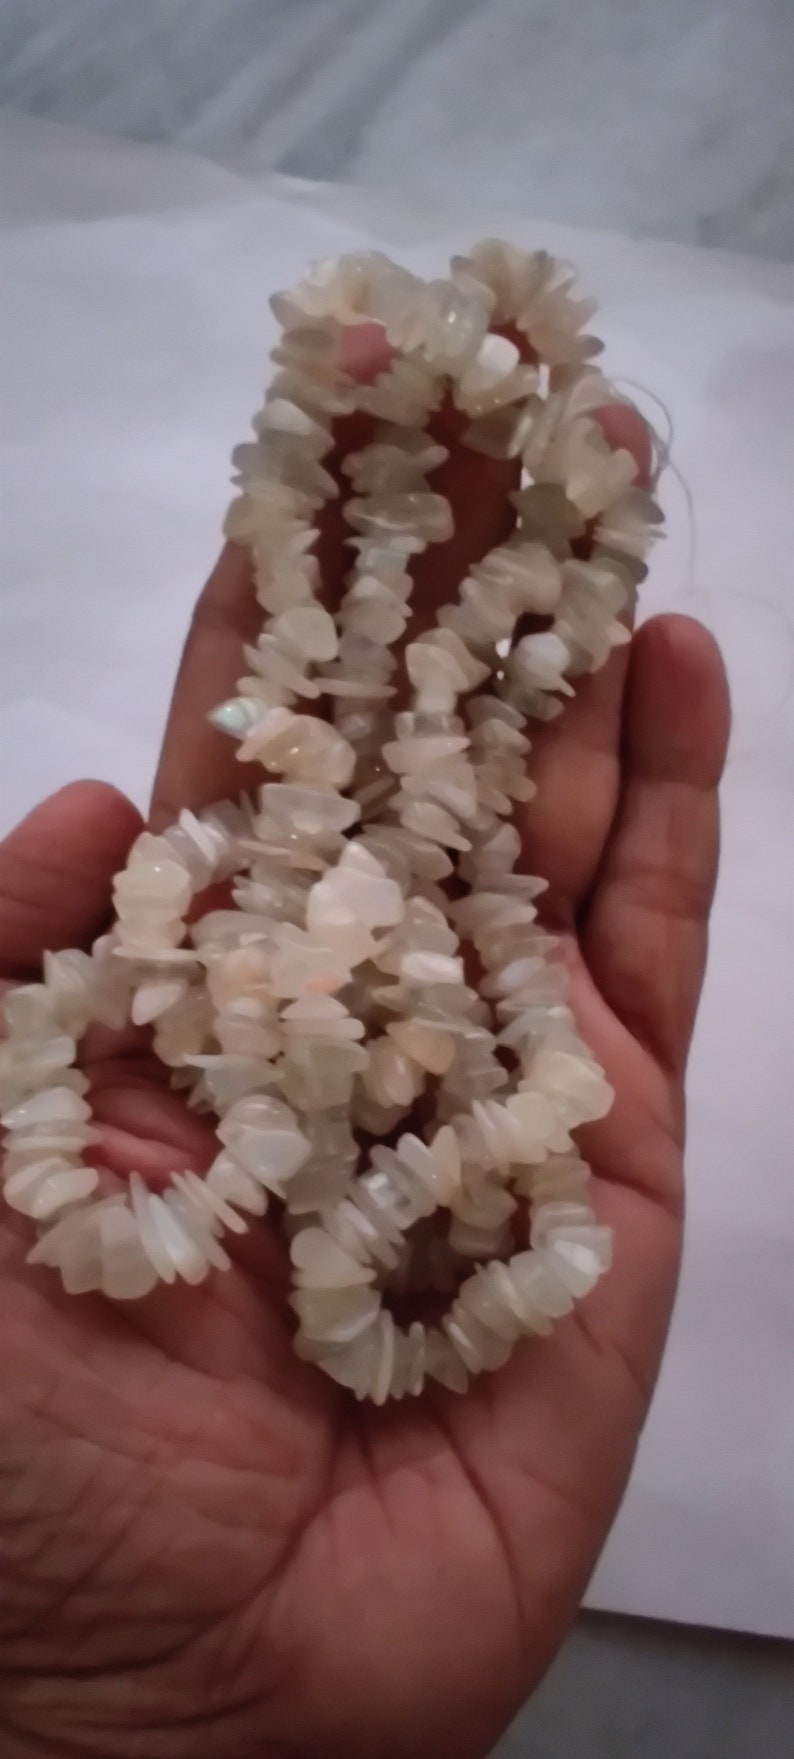 35 Natural White Moonstone Chip Beads Smooth White Moonstone Chip Bead Uncut Chip Bead Jewelery Supplies 3-7mm Polished Beads